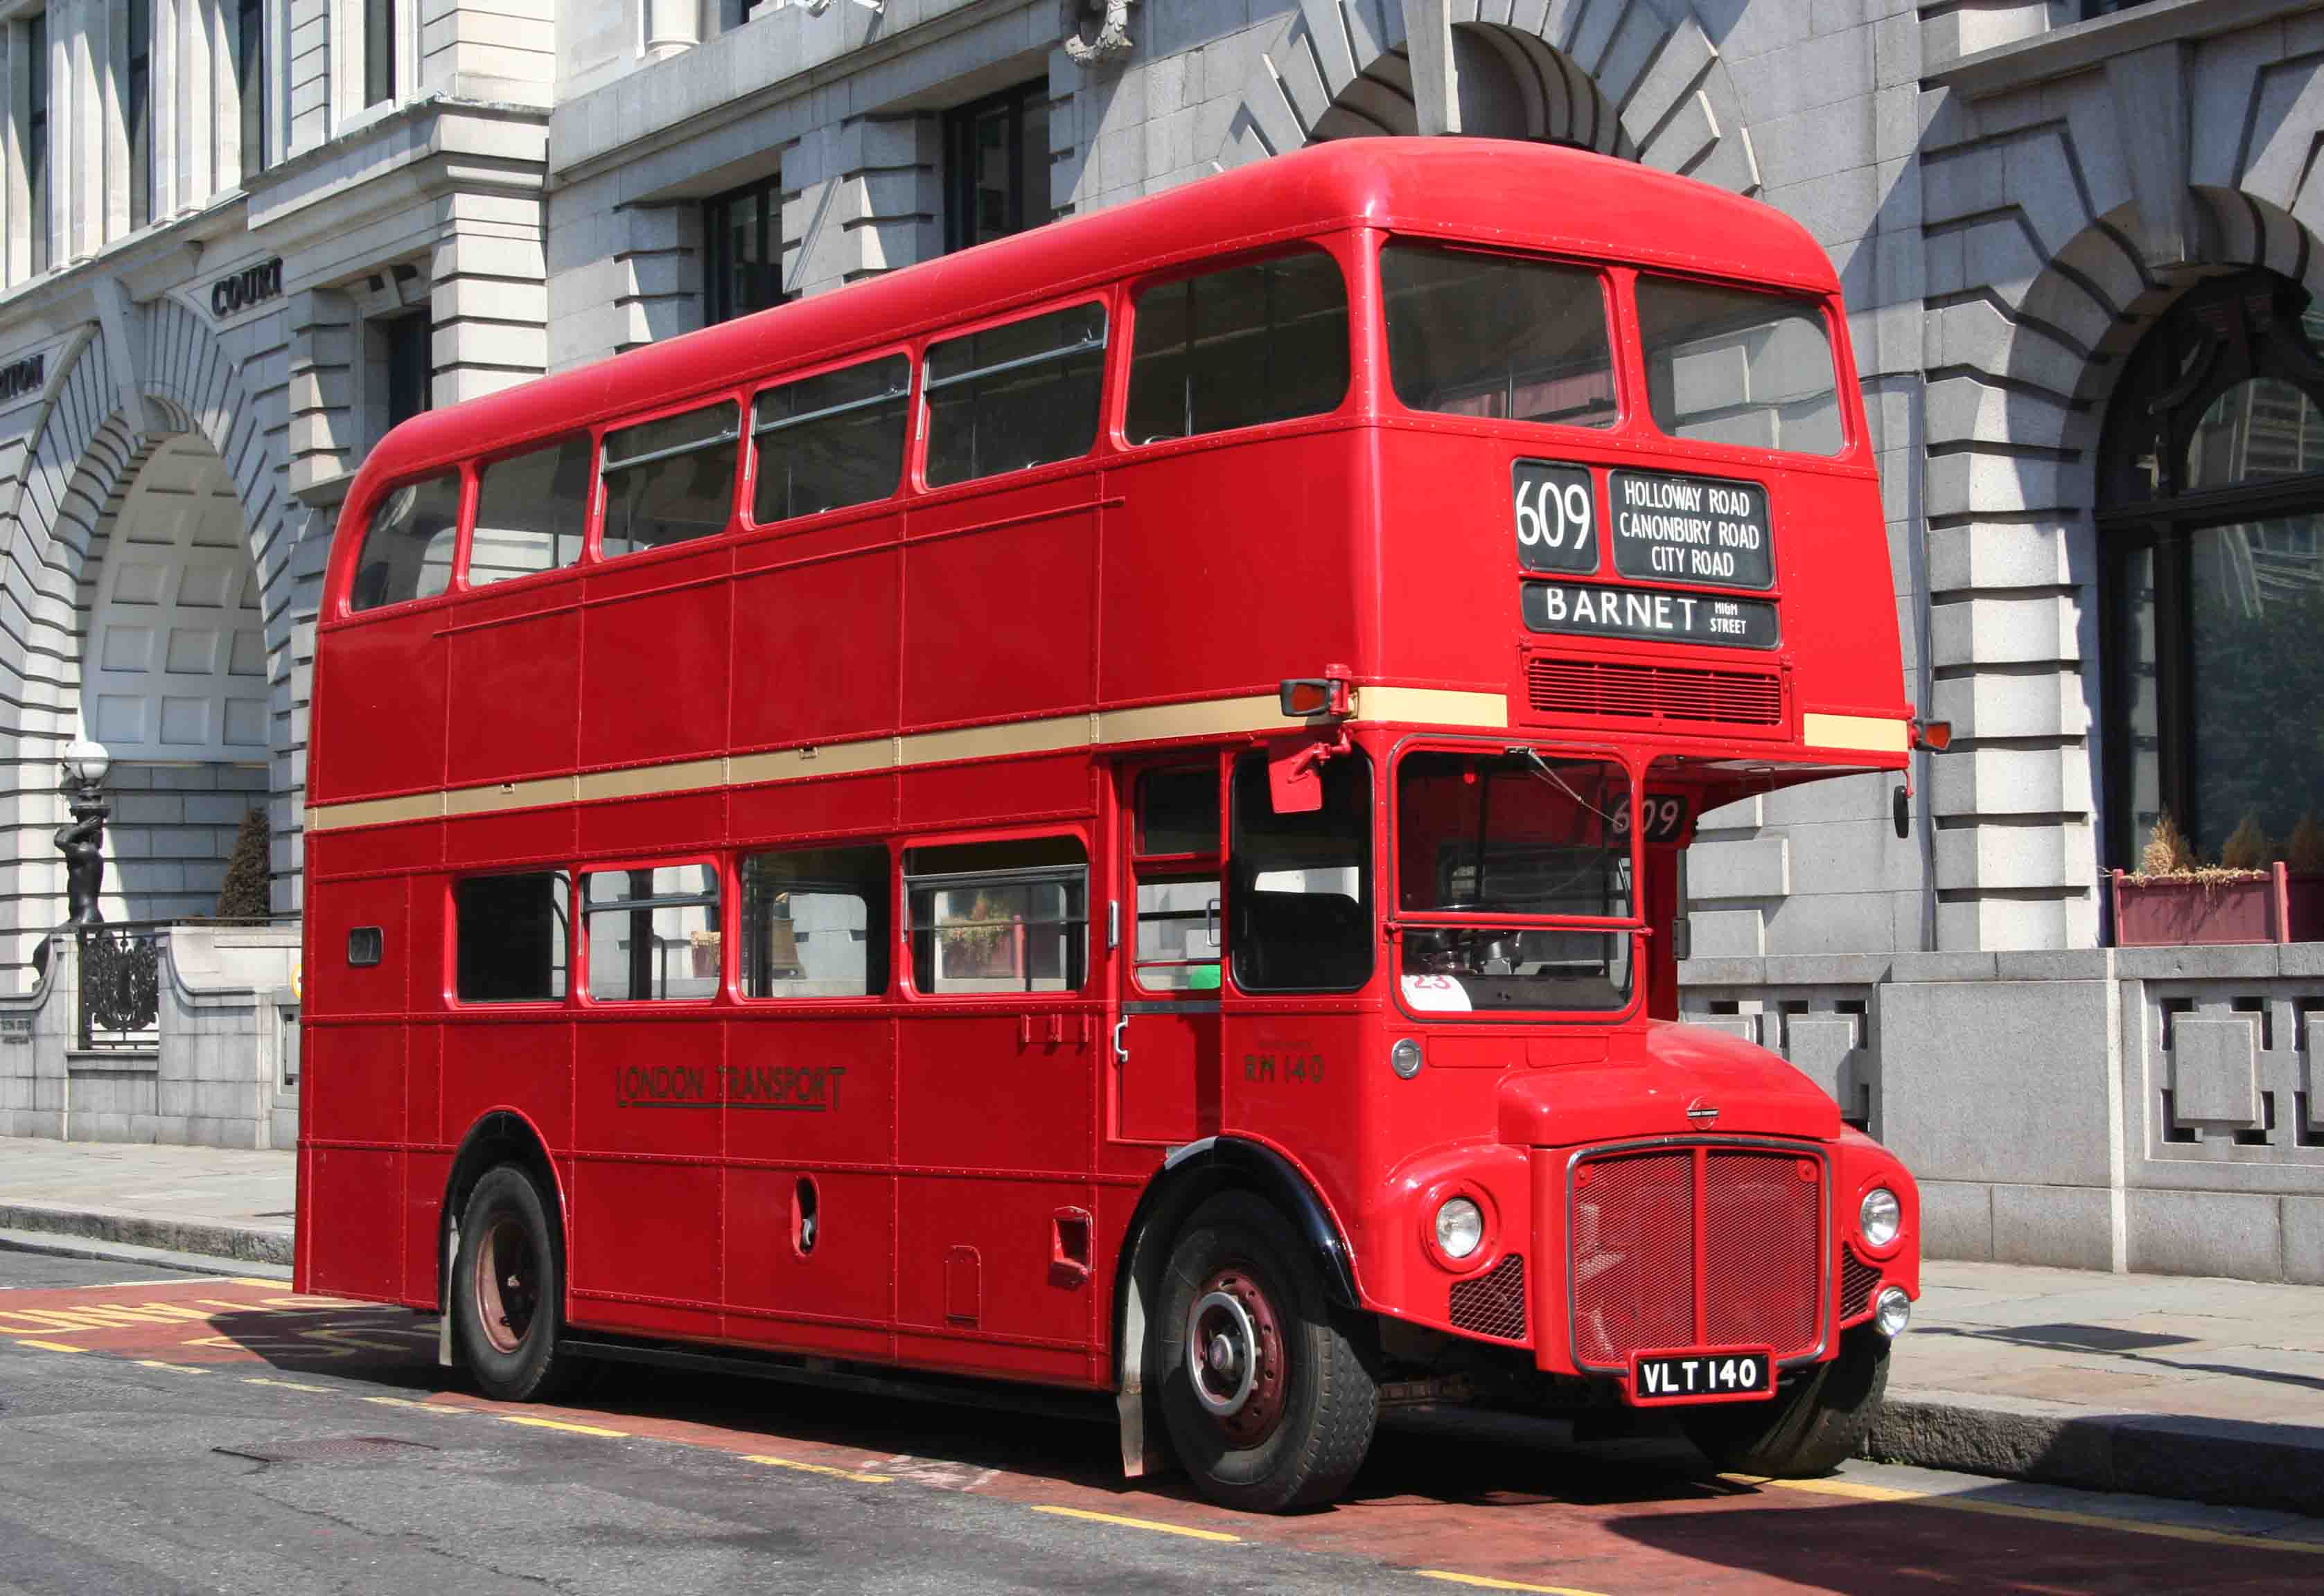 Free download 1959 AEC Routemaster bus RM140 London Bus Museum [3354x2304] for your Desktop, Mobile & Tablet. Explore London Bus Wallpaper. School Bus Wallpaper, Vw Bus Wallpaper, Vans Wallpaper Downloads